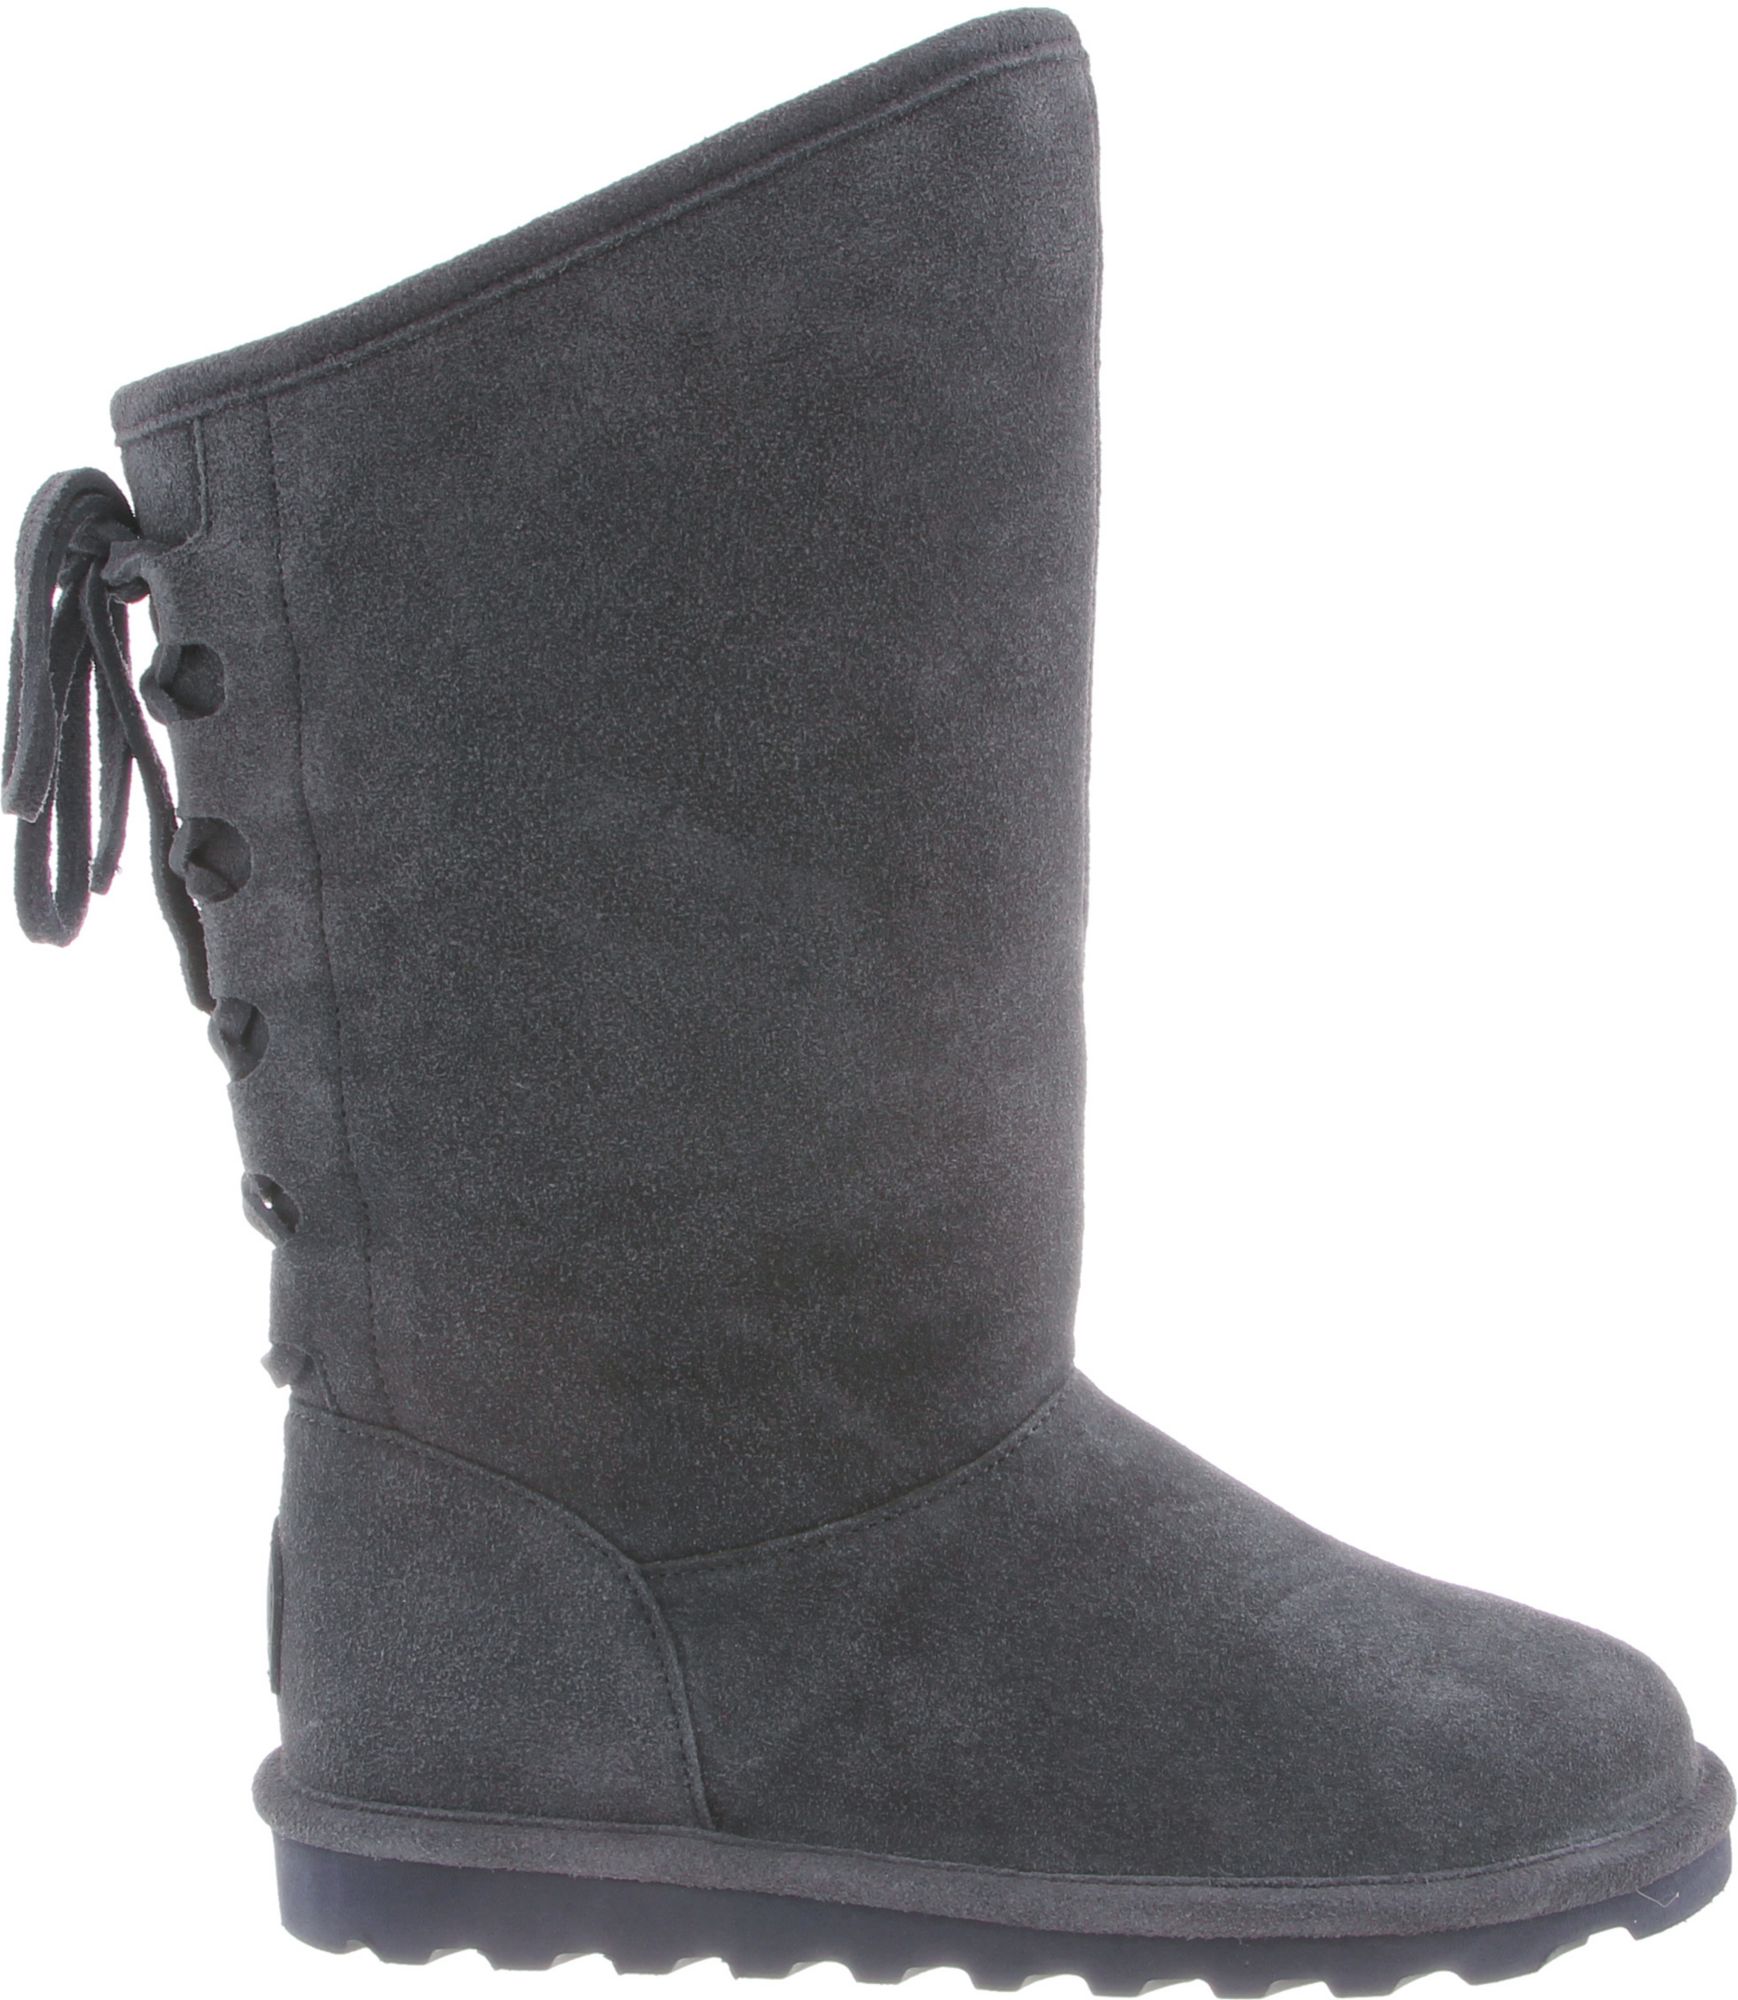 phylly bearpaw boots